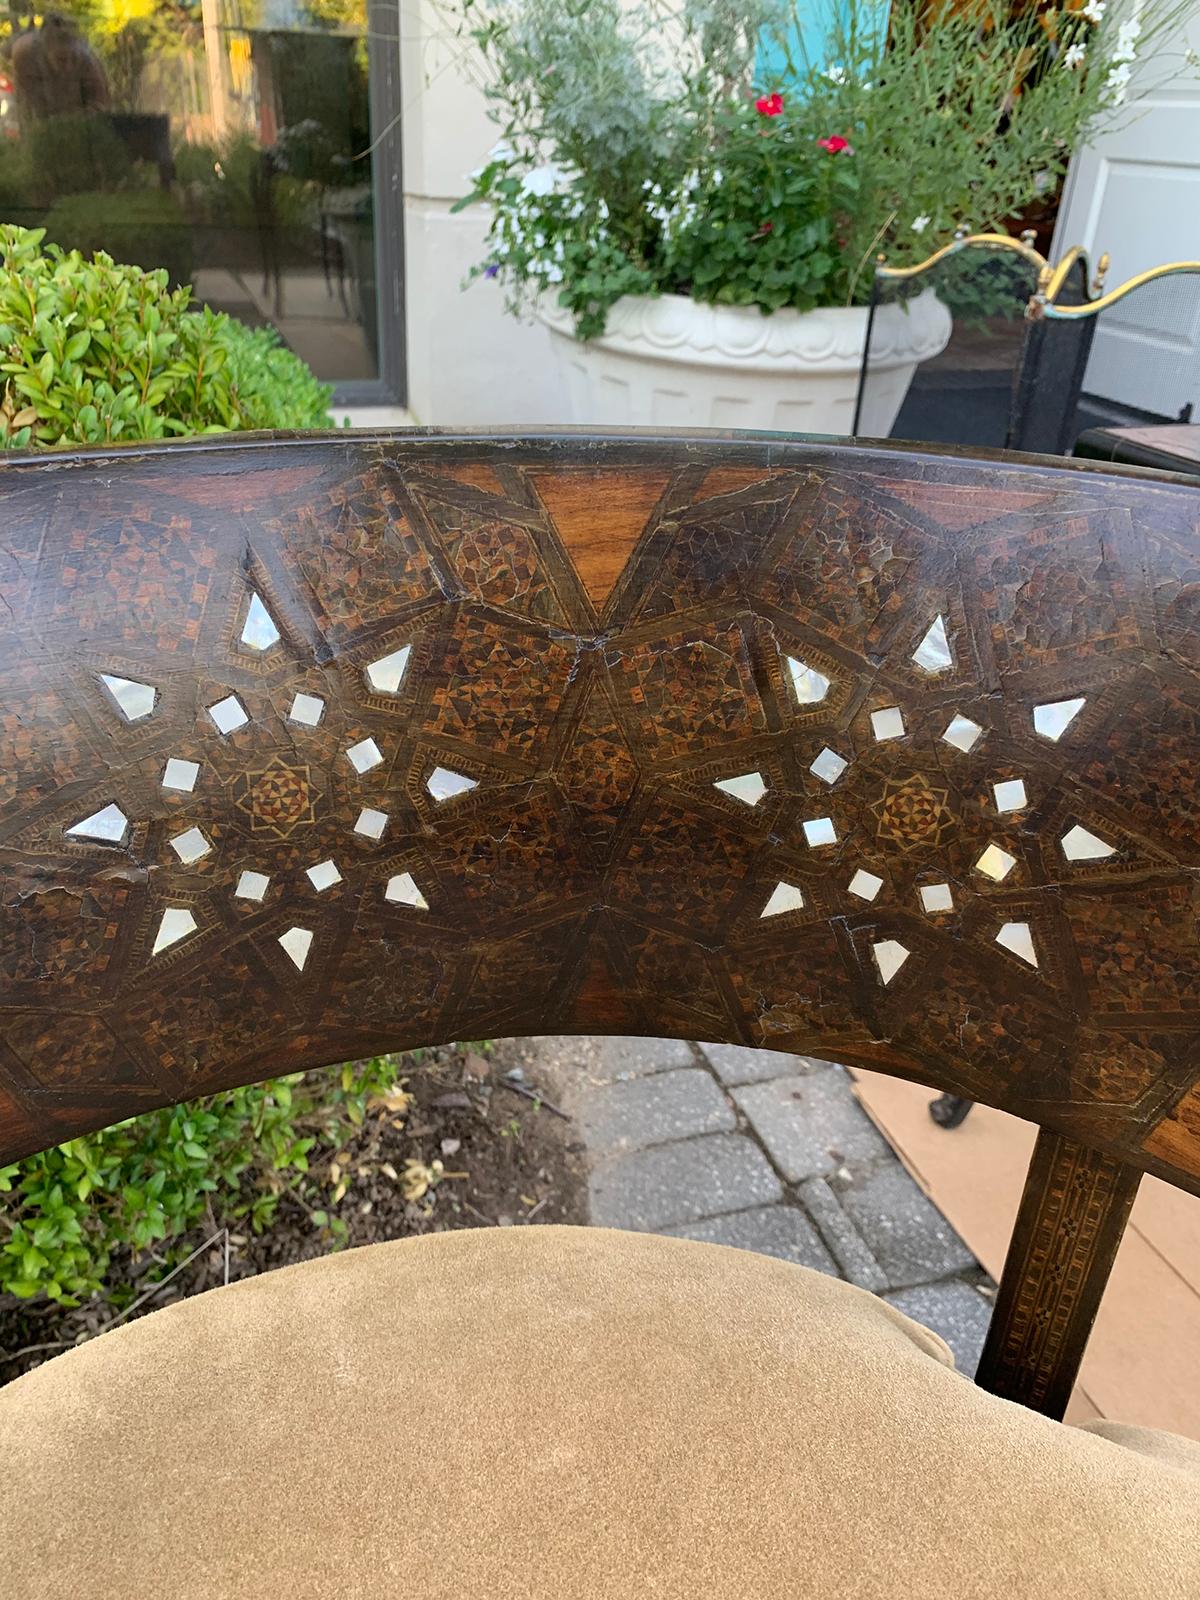 Mother-of-Pearl 19th-Early 20th Century Syrian Inlaid Barrel Tub Chair